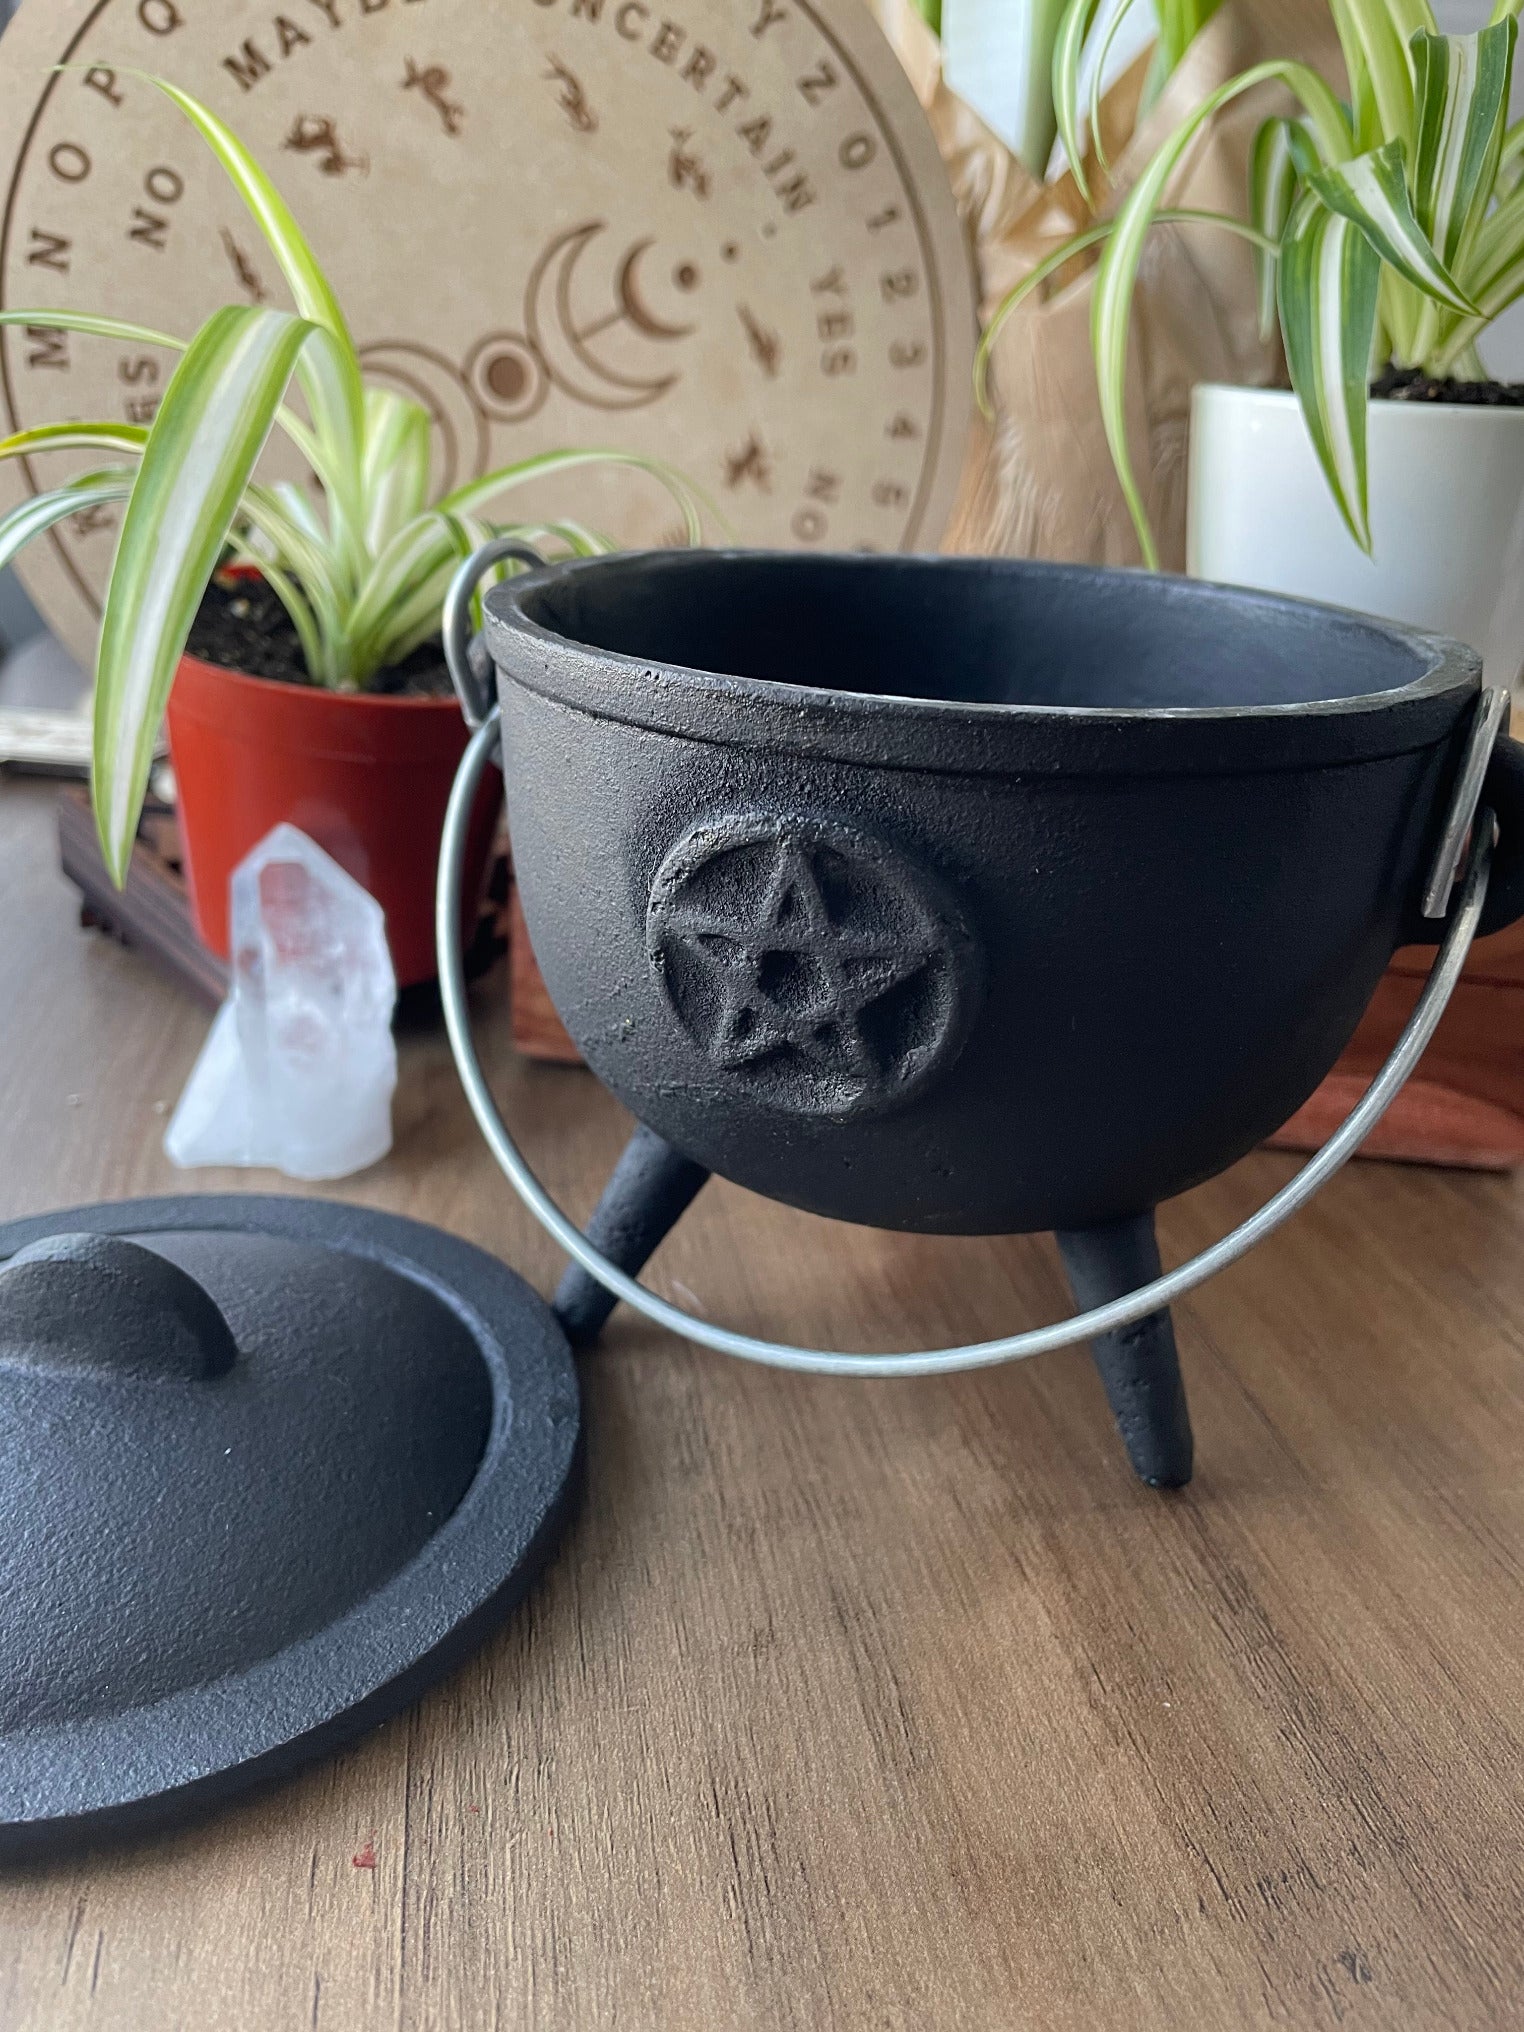 Pictured is a cast iron cauldron with lid.